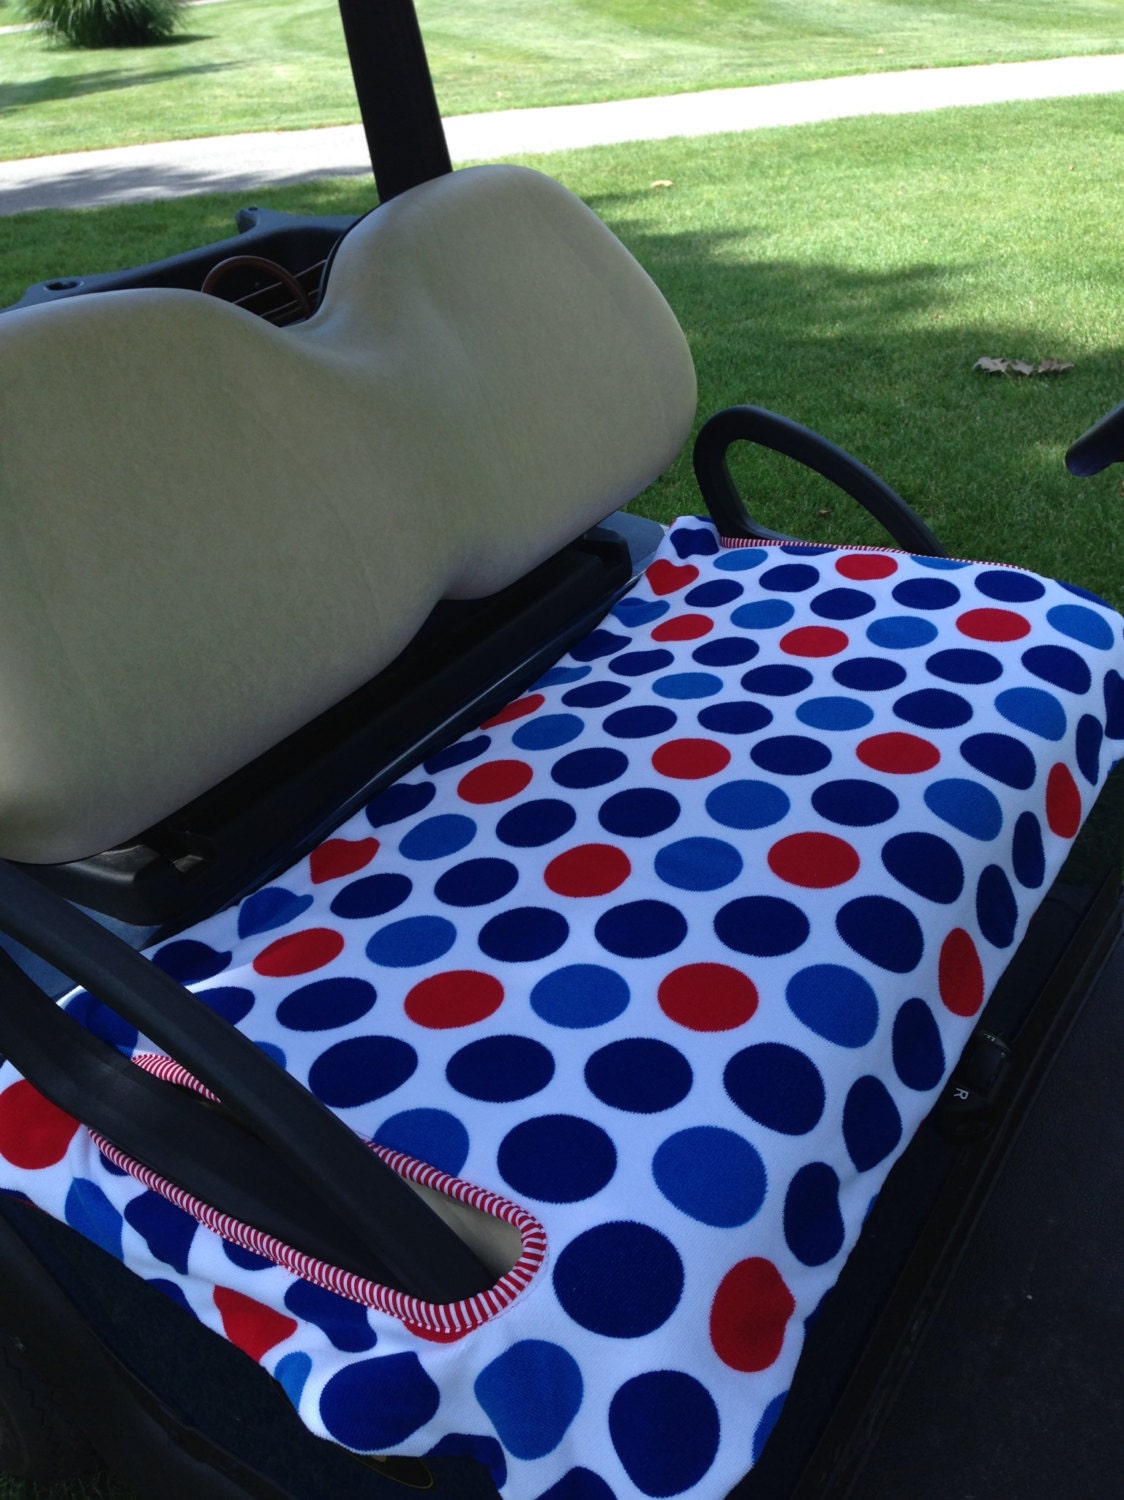 Primary Dots Terry Cloth Golf Cart Seat Cover by GolfMeAround